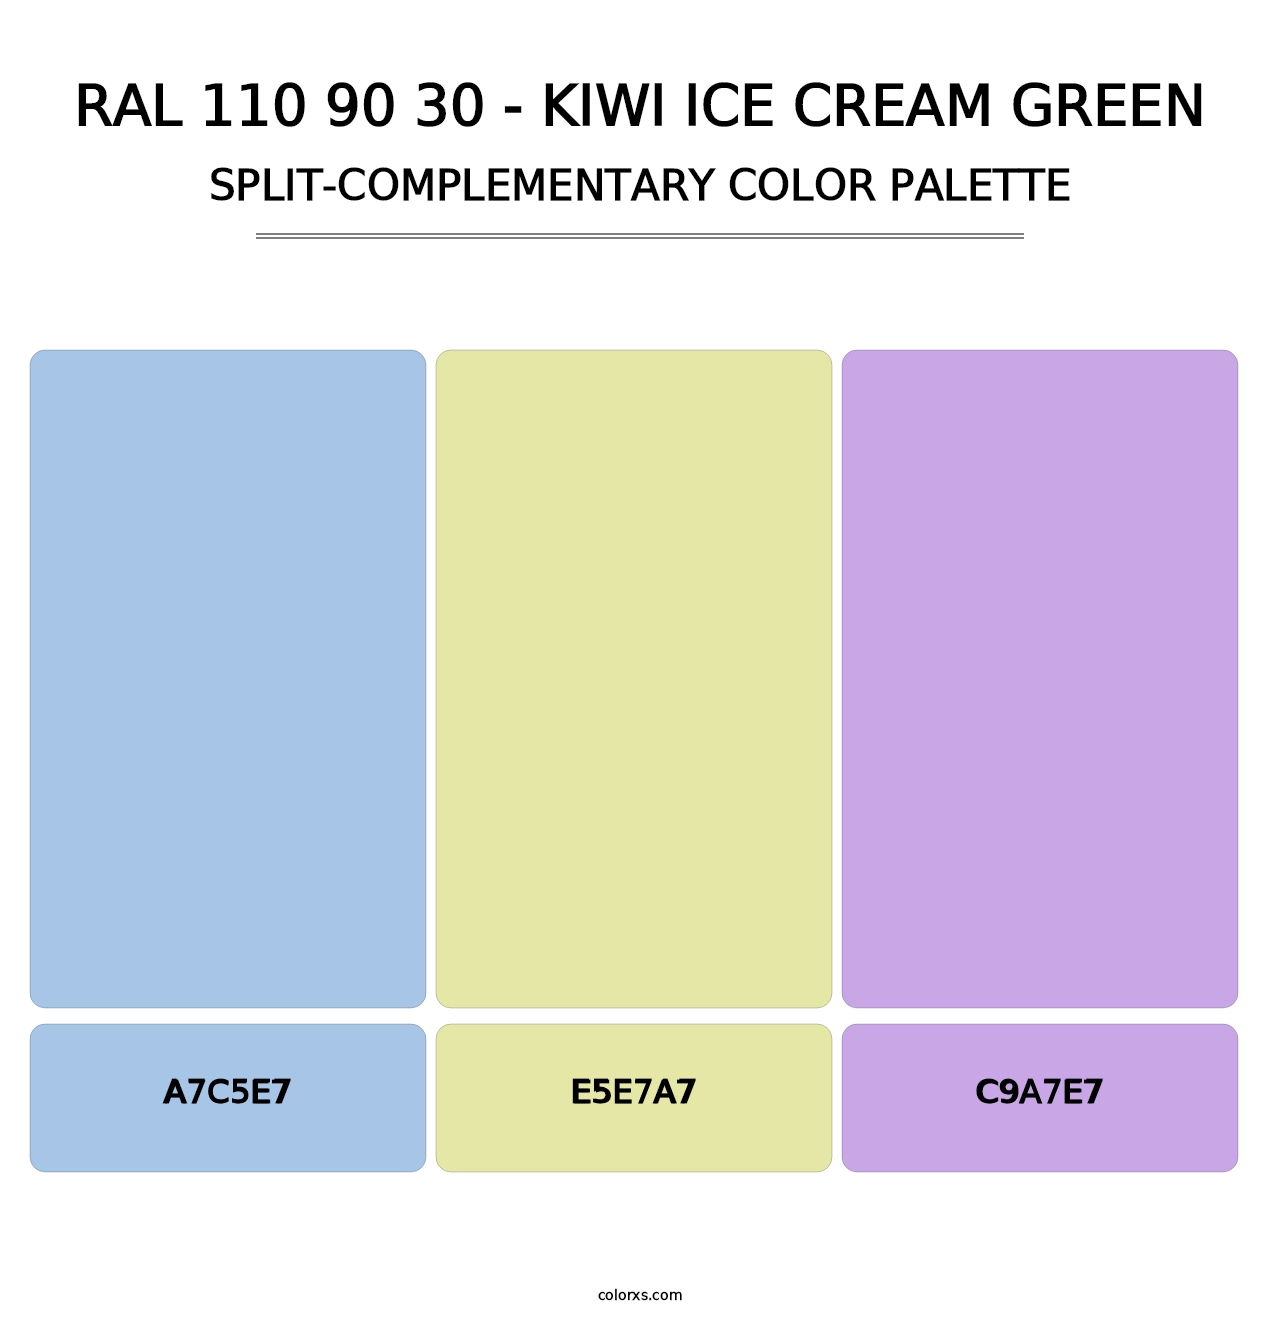 RAL 110 90 30 - Kiwi Ice Cream Green - Split-Complementary Color Palette